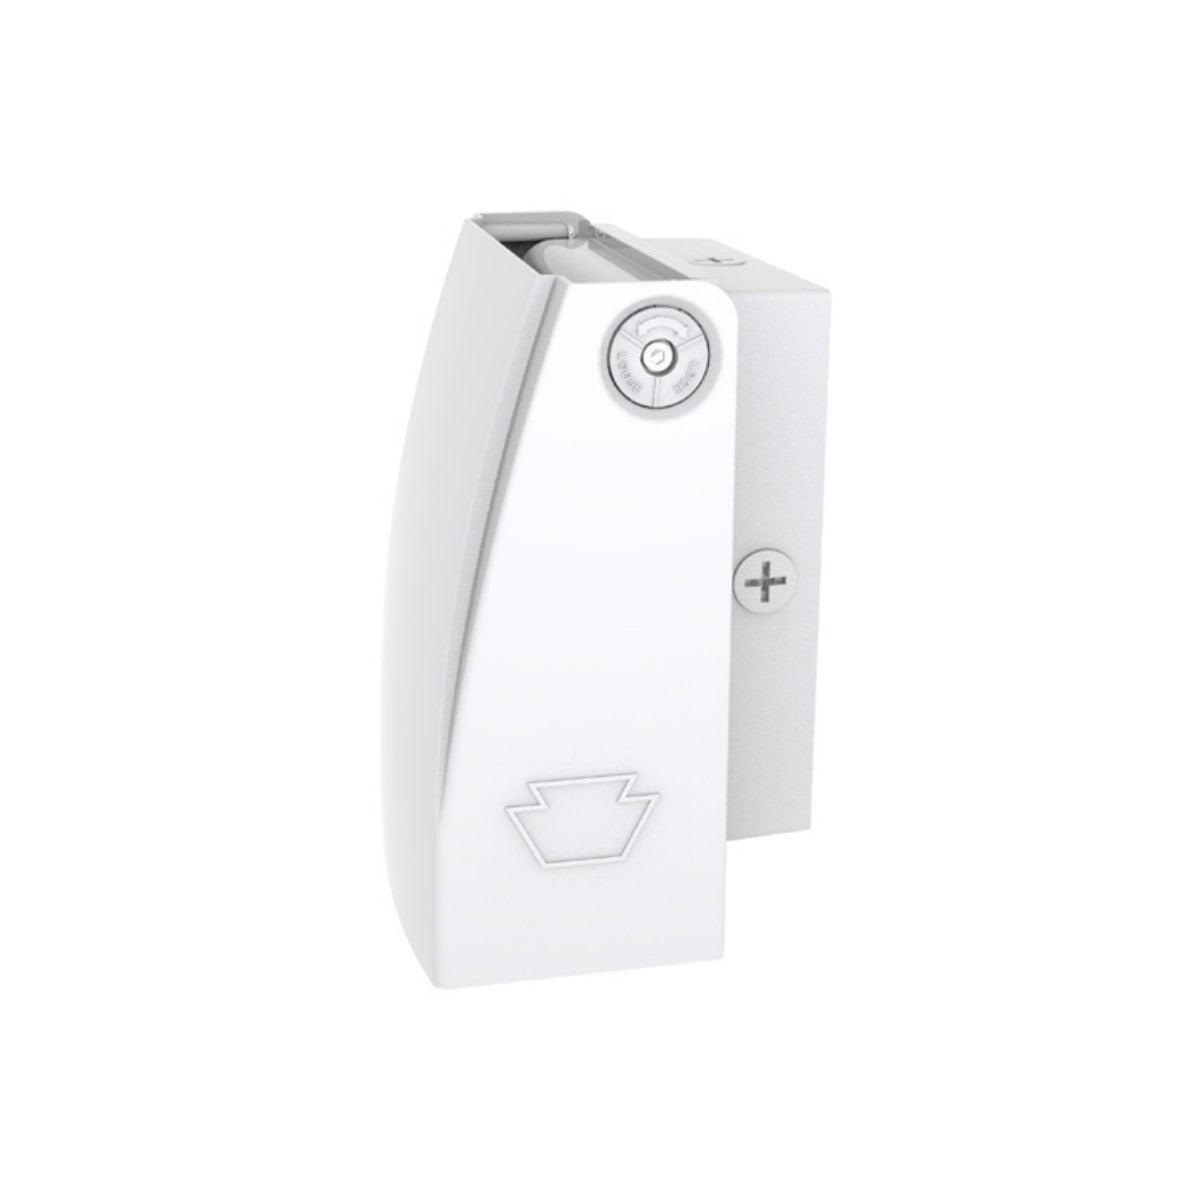 Adjustable Wall Pack with logo, rectangular shape, cross, and button. Provides CCT tunable white light, power select, and color select technology. Adjustable angle for targeted illumination. Integrated photocell for dusk-to-dawn lighting. UL Listed, IP65 Rated, DLC Premium Listed.